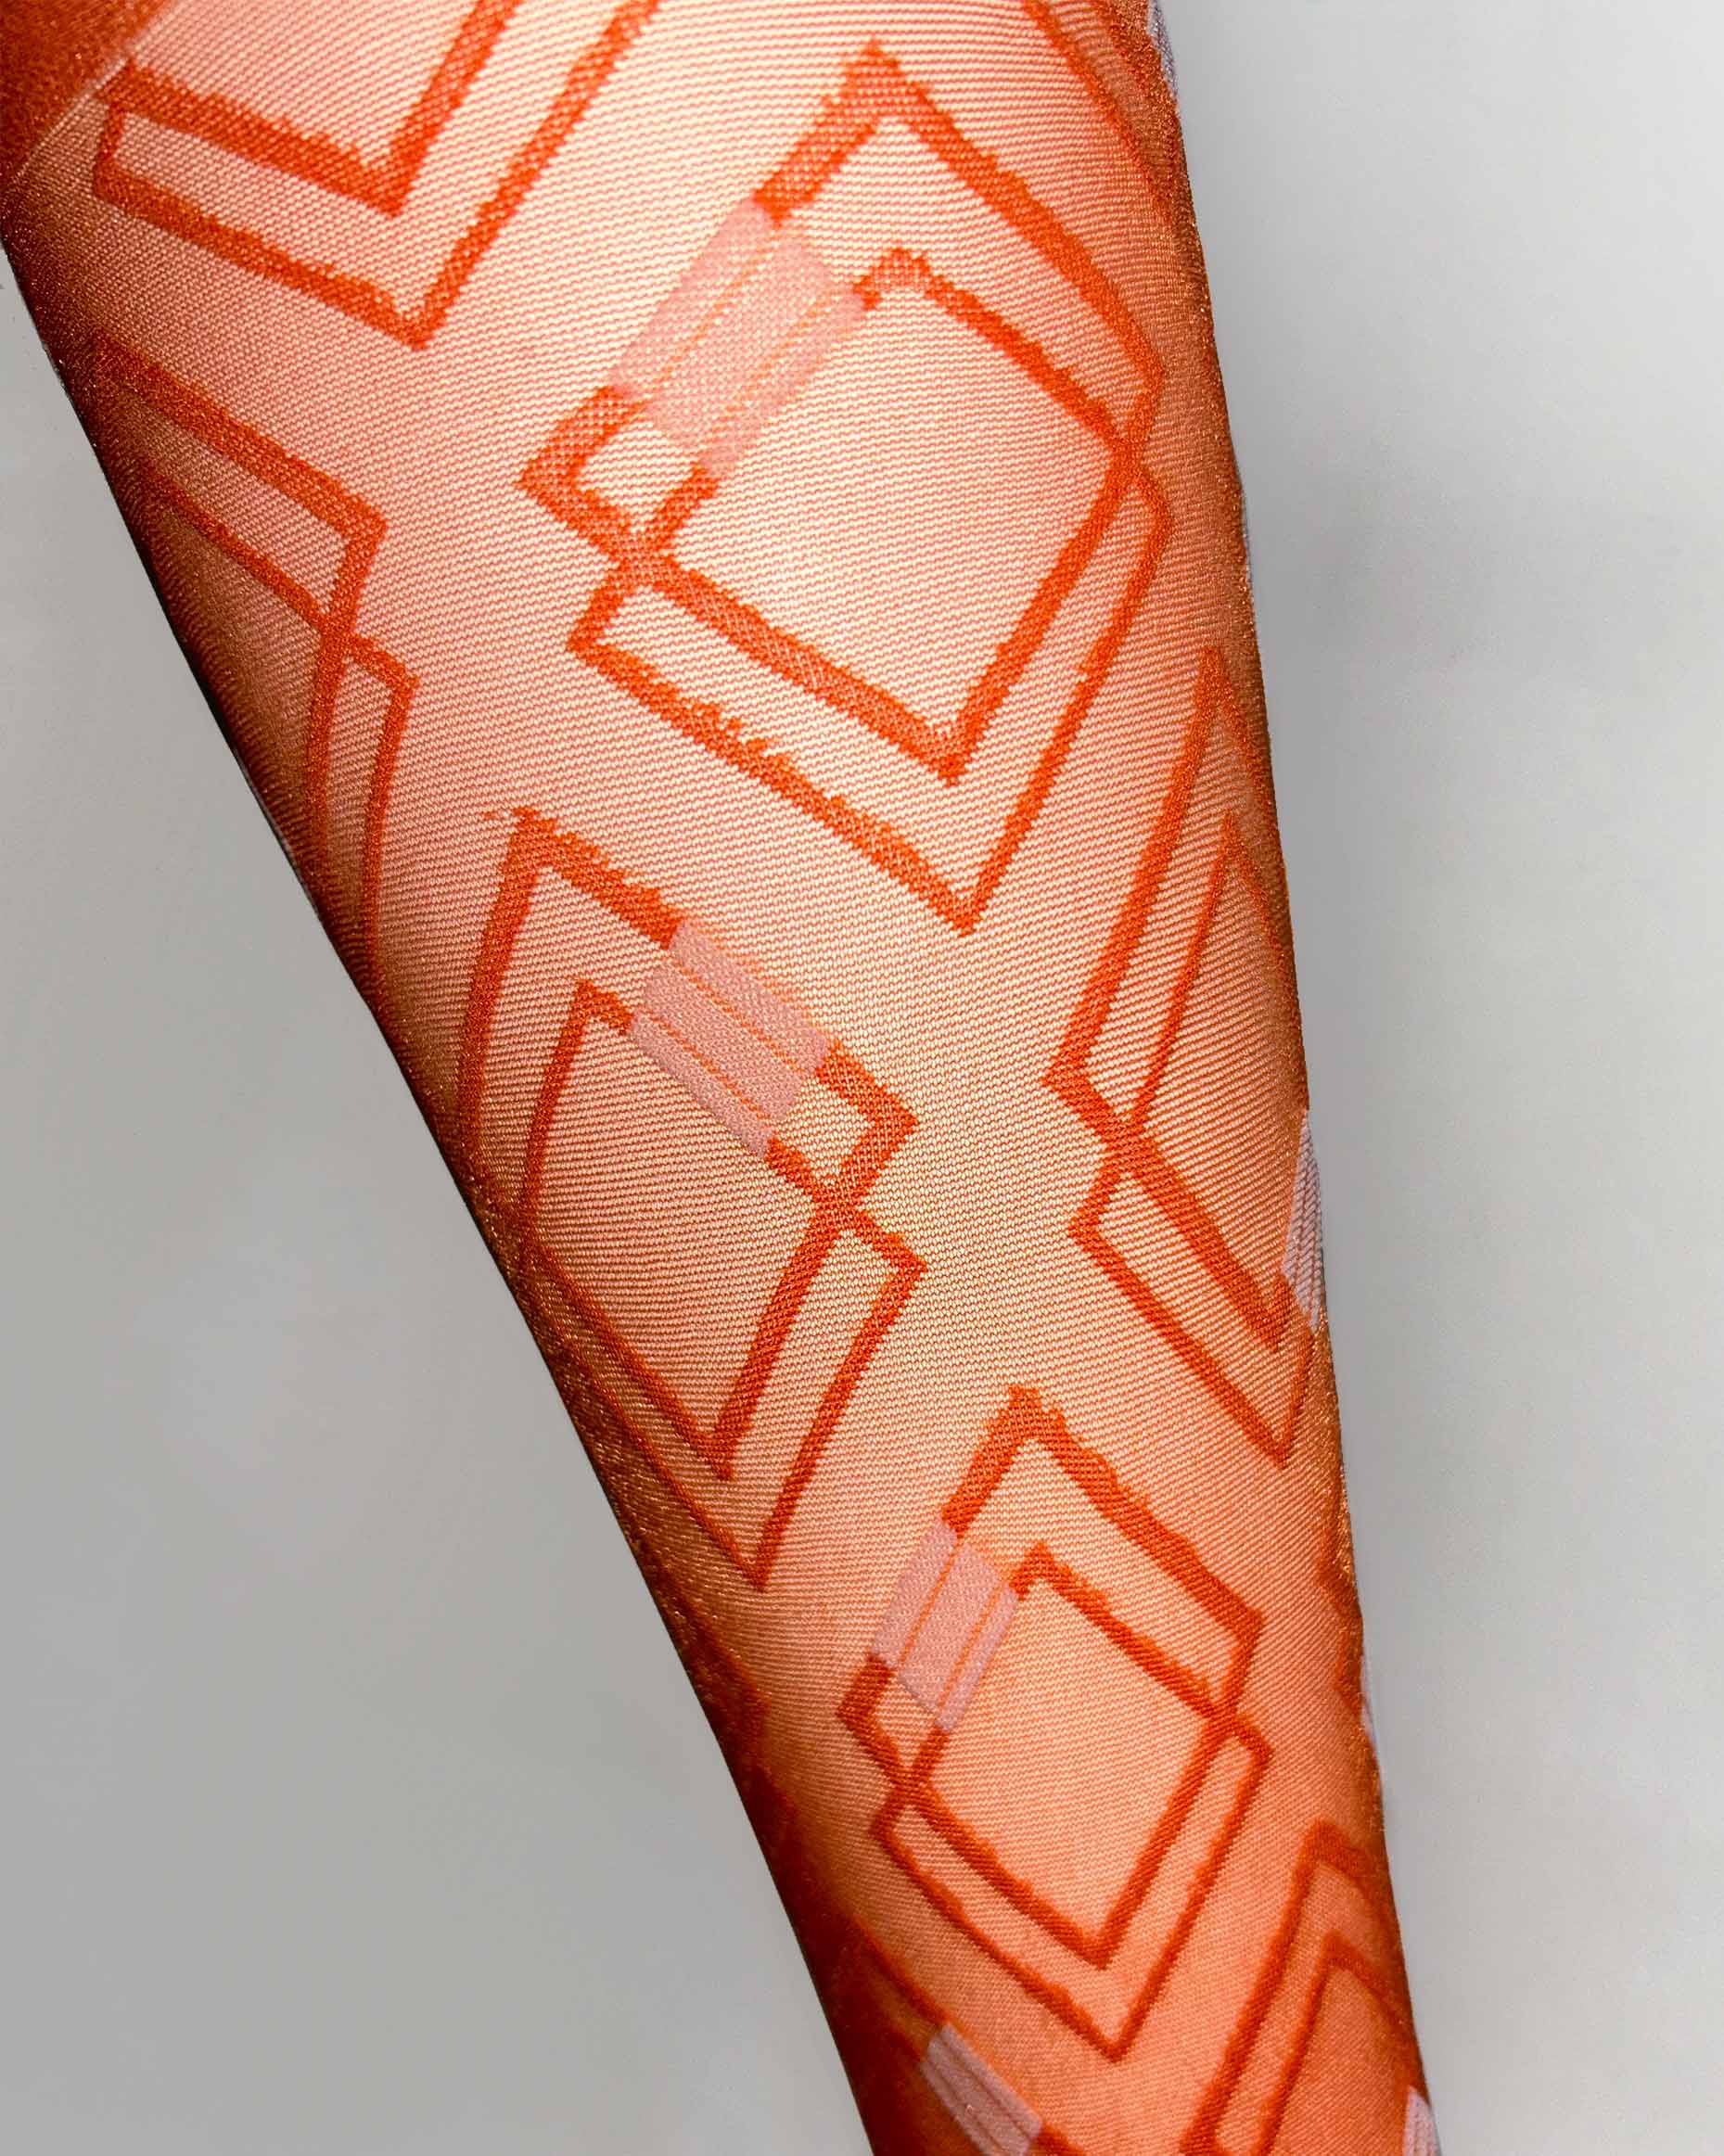 Omsa Poison Gambaletto - Sheer orange nude fashion knee-high socks with a woven geometric diamond style pattern with white square shapes and a plain comfort cuff.